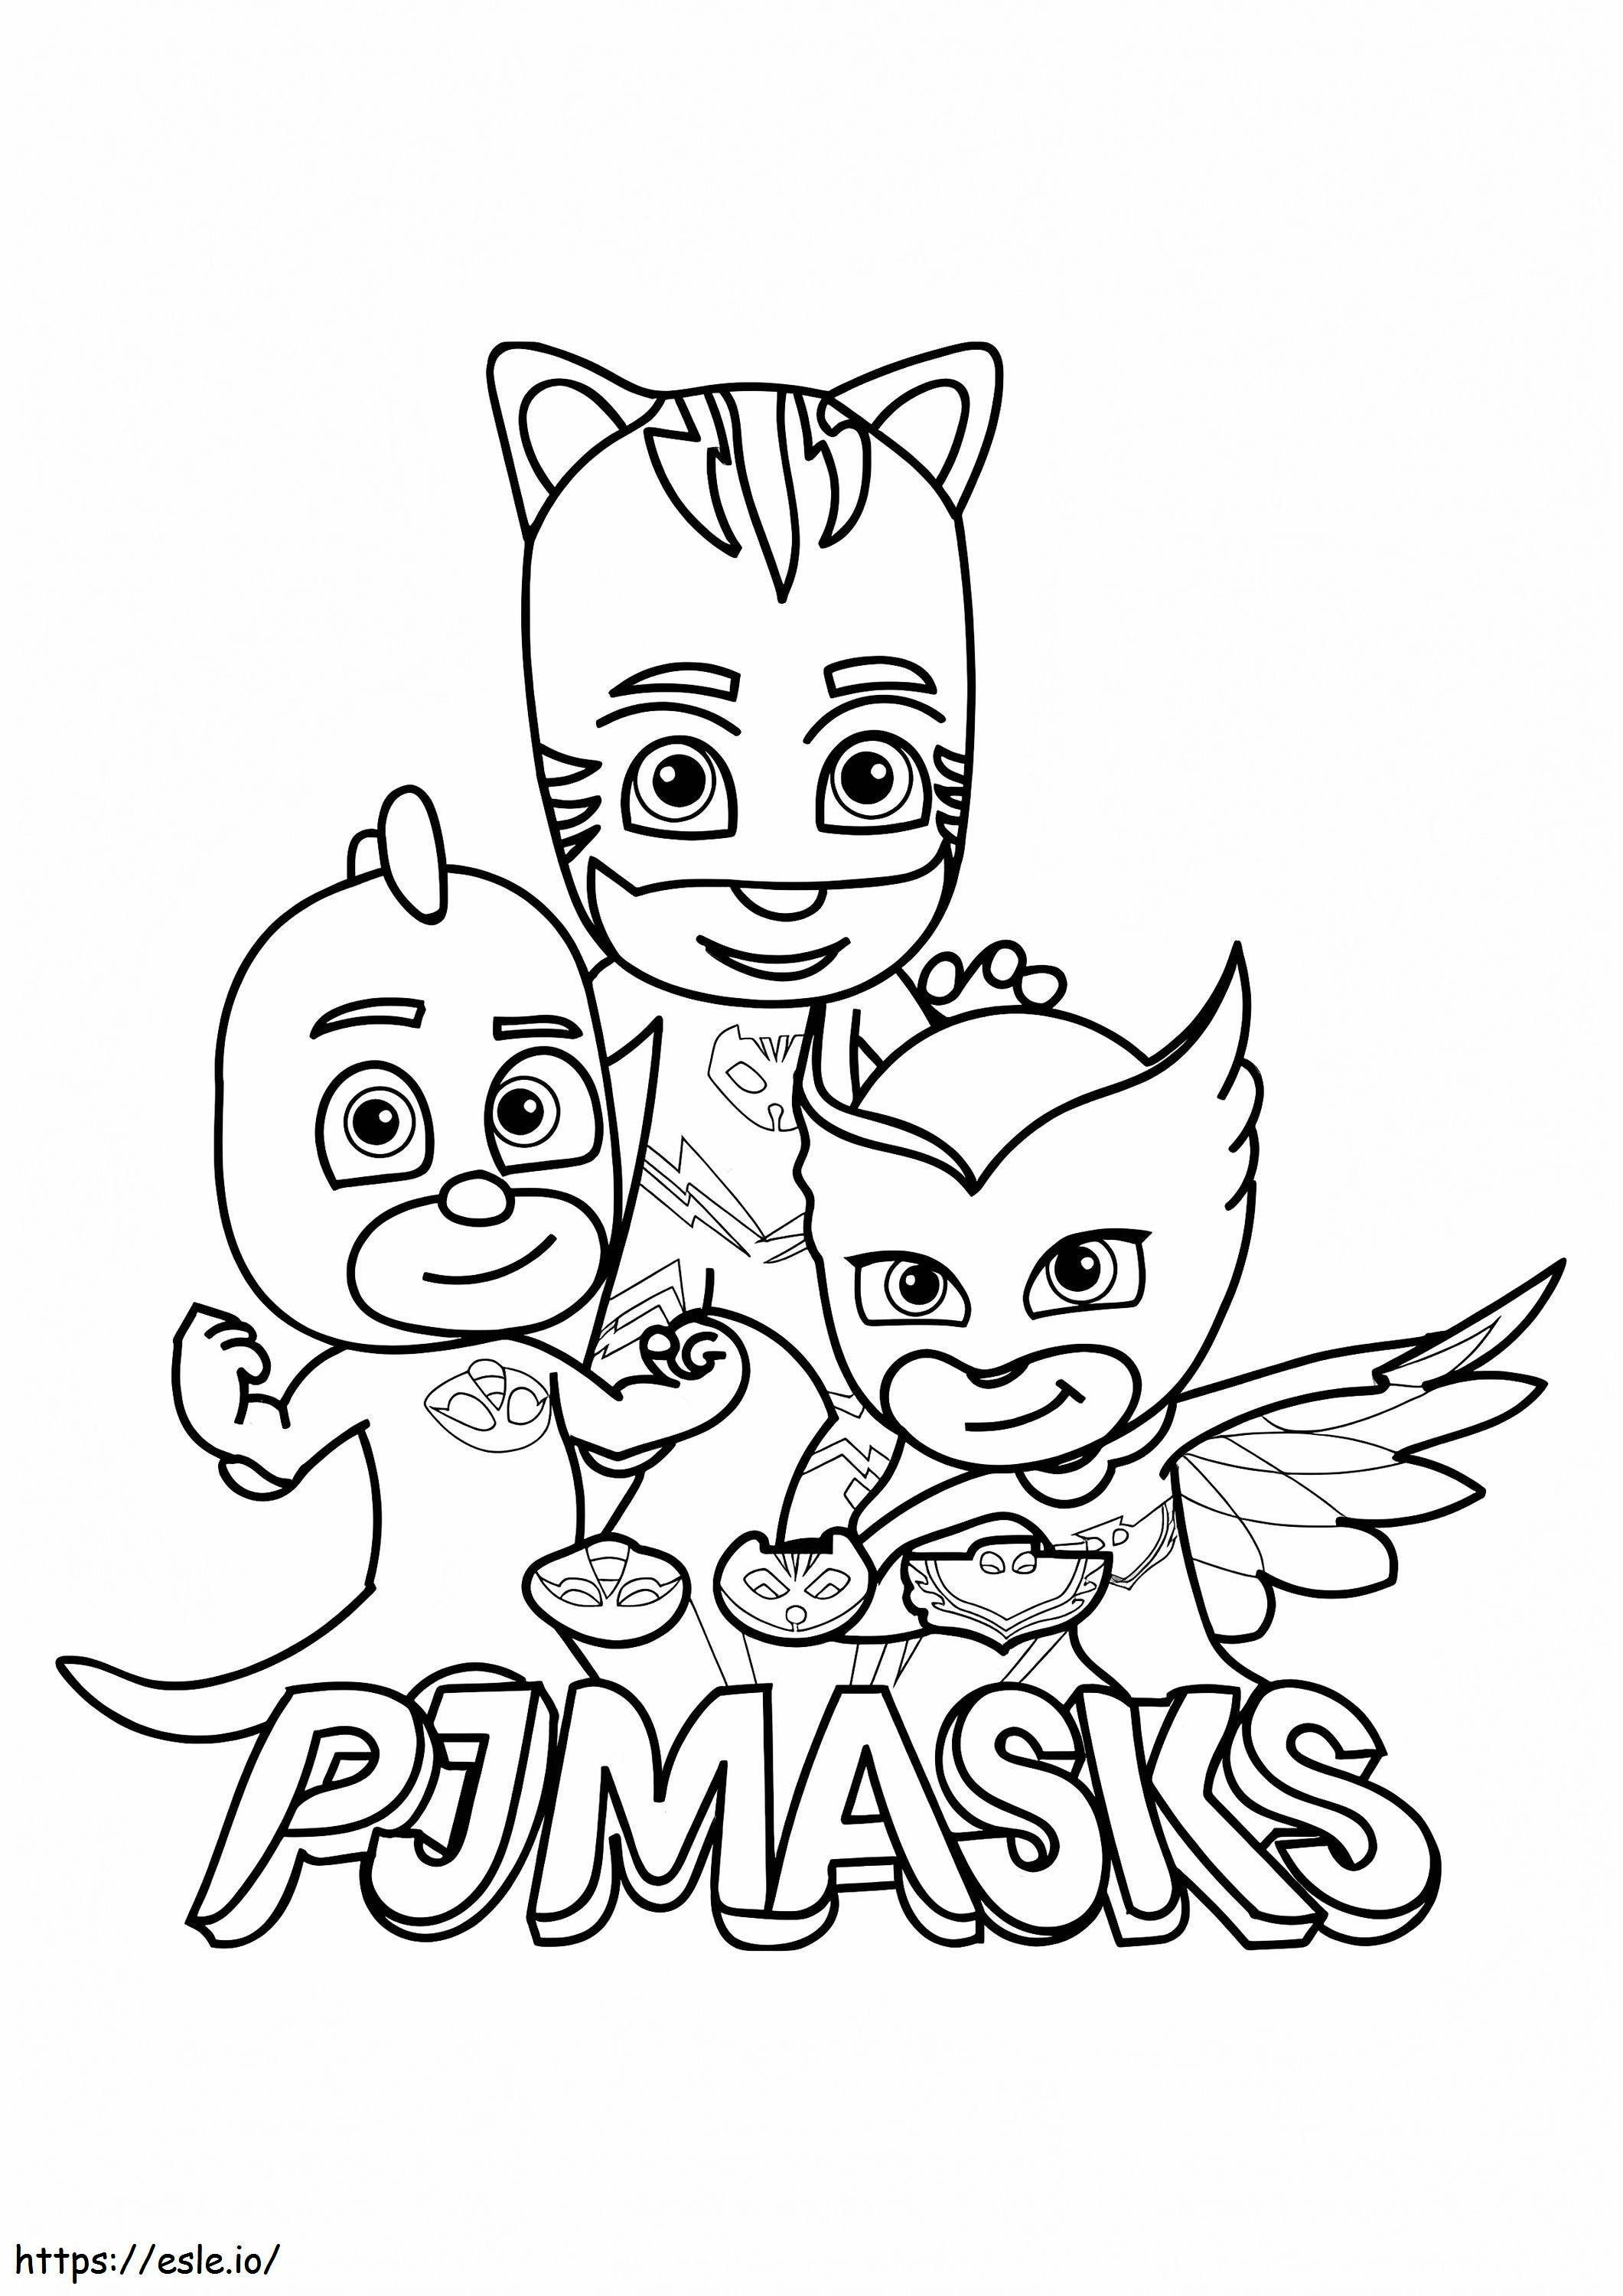 PJ Mask coloring page